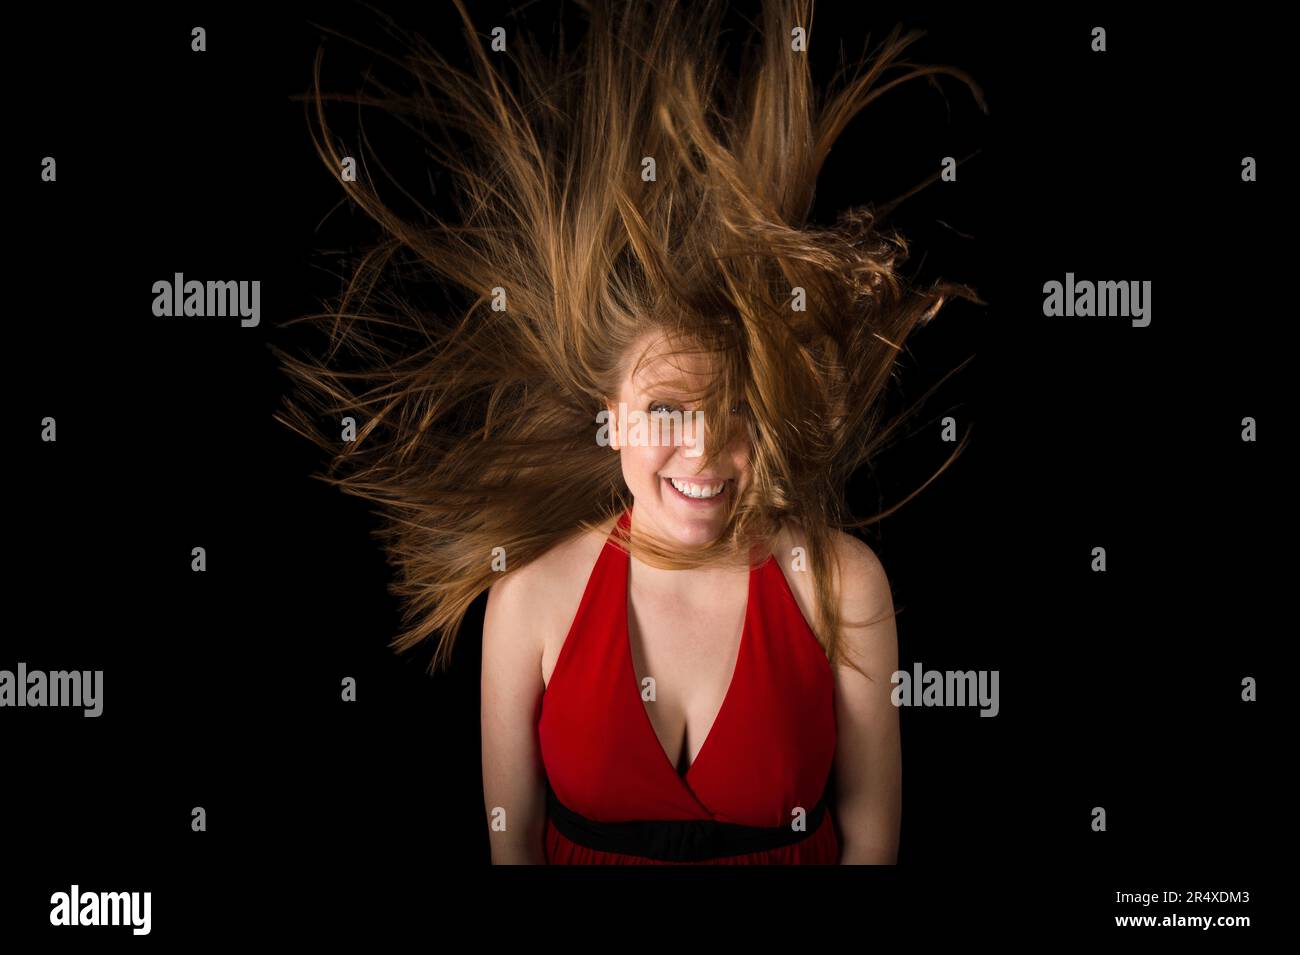 Young woman's hair flies dramatically up around her head; Lincoln, Nebraska, United States of America Stock Photo